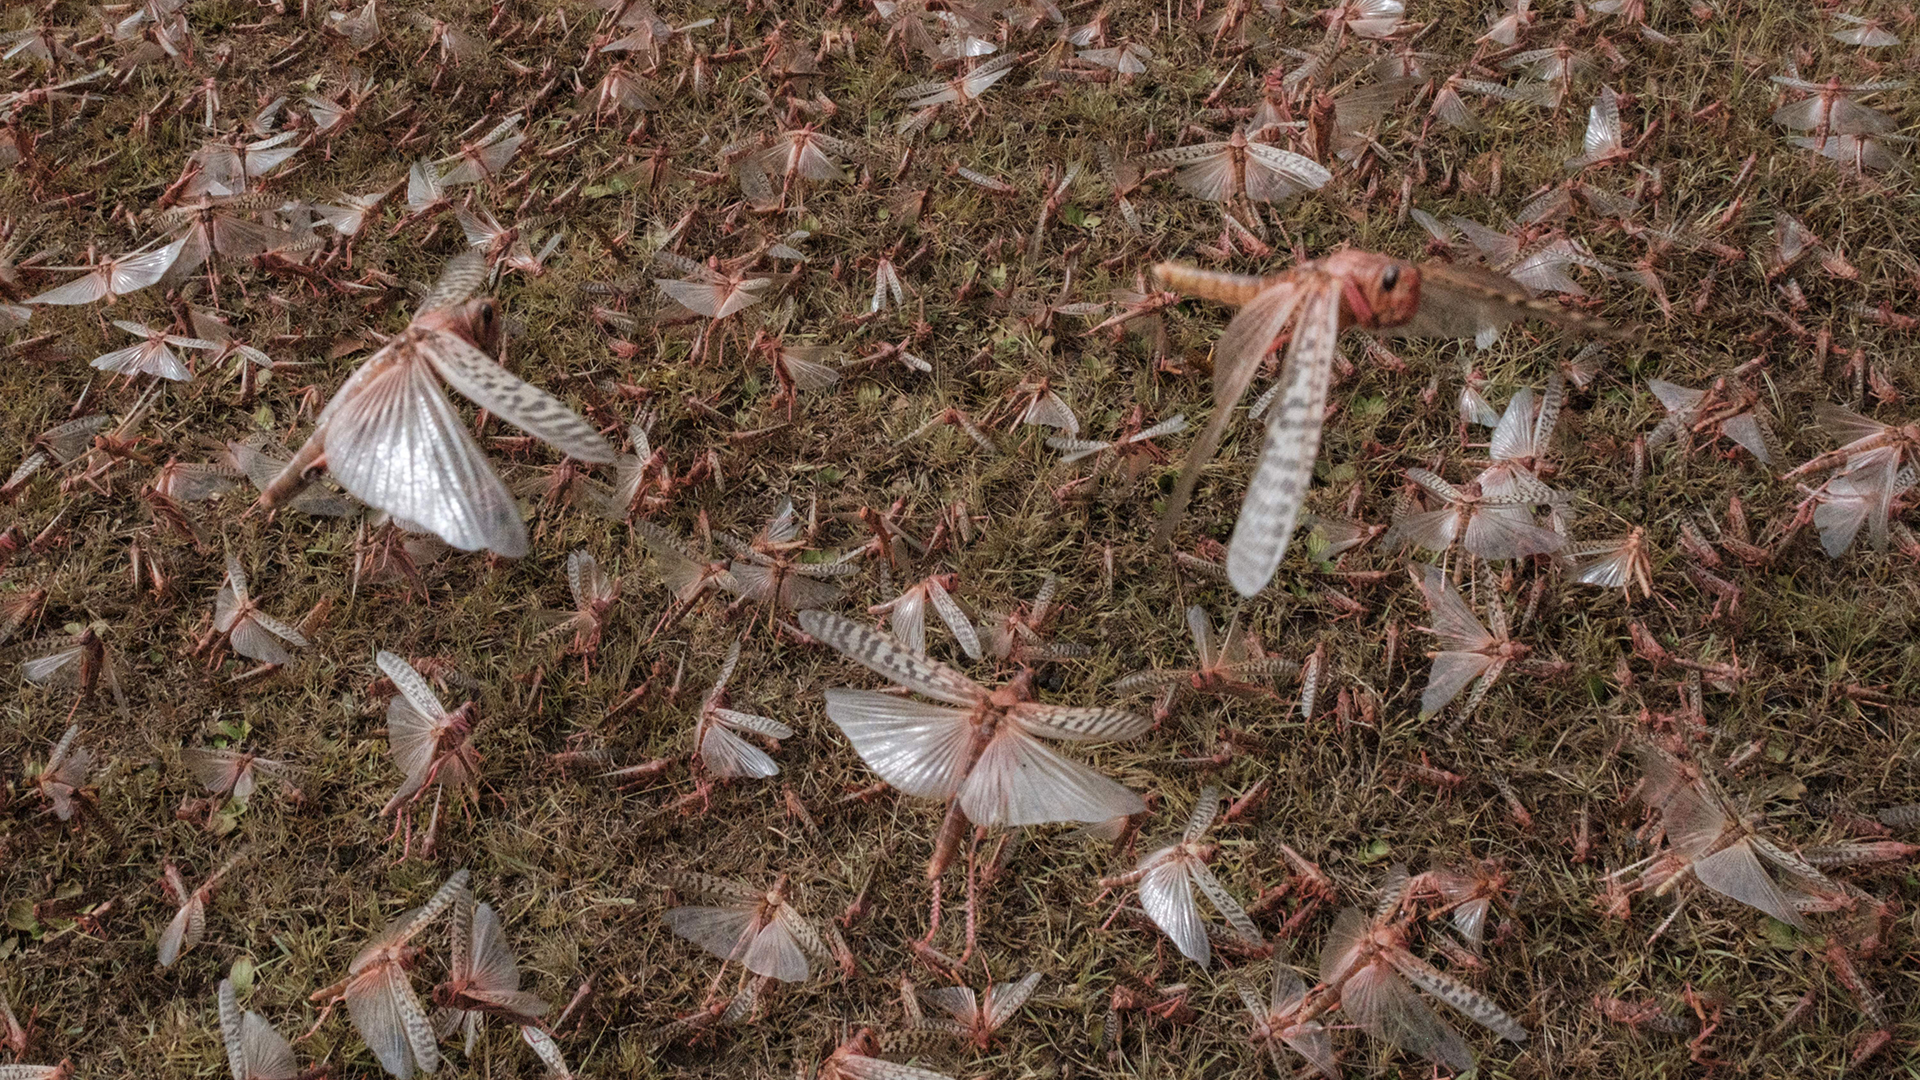 A picture taken on Feb. 9, 2021, shows a swarm of desert locusts covering the ground in Meru, Kenya.